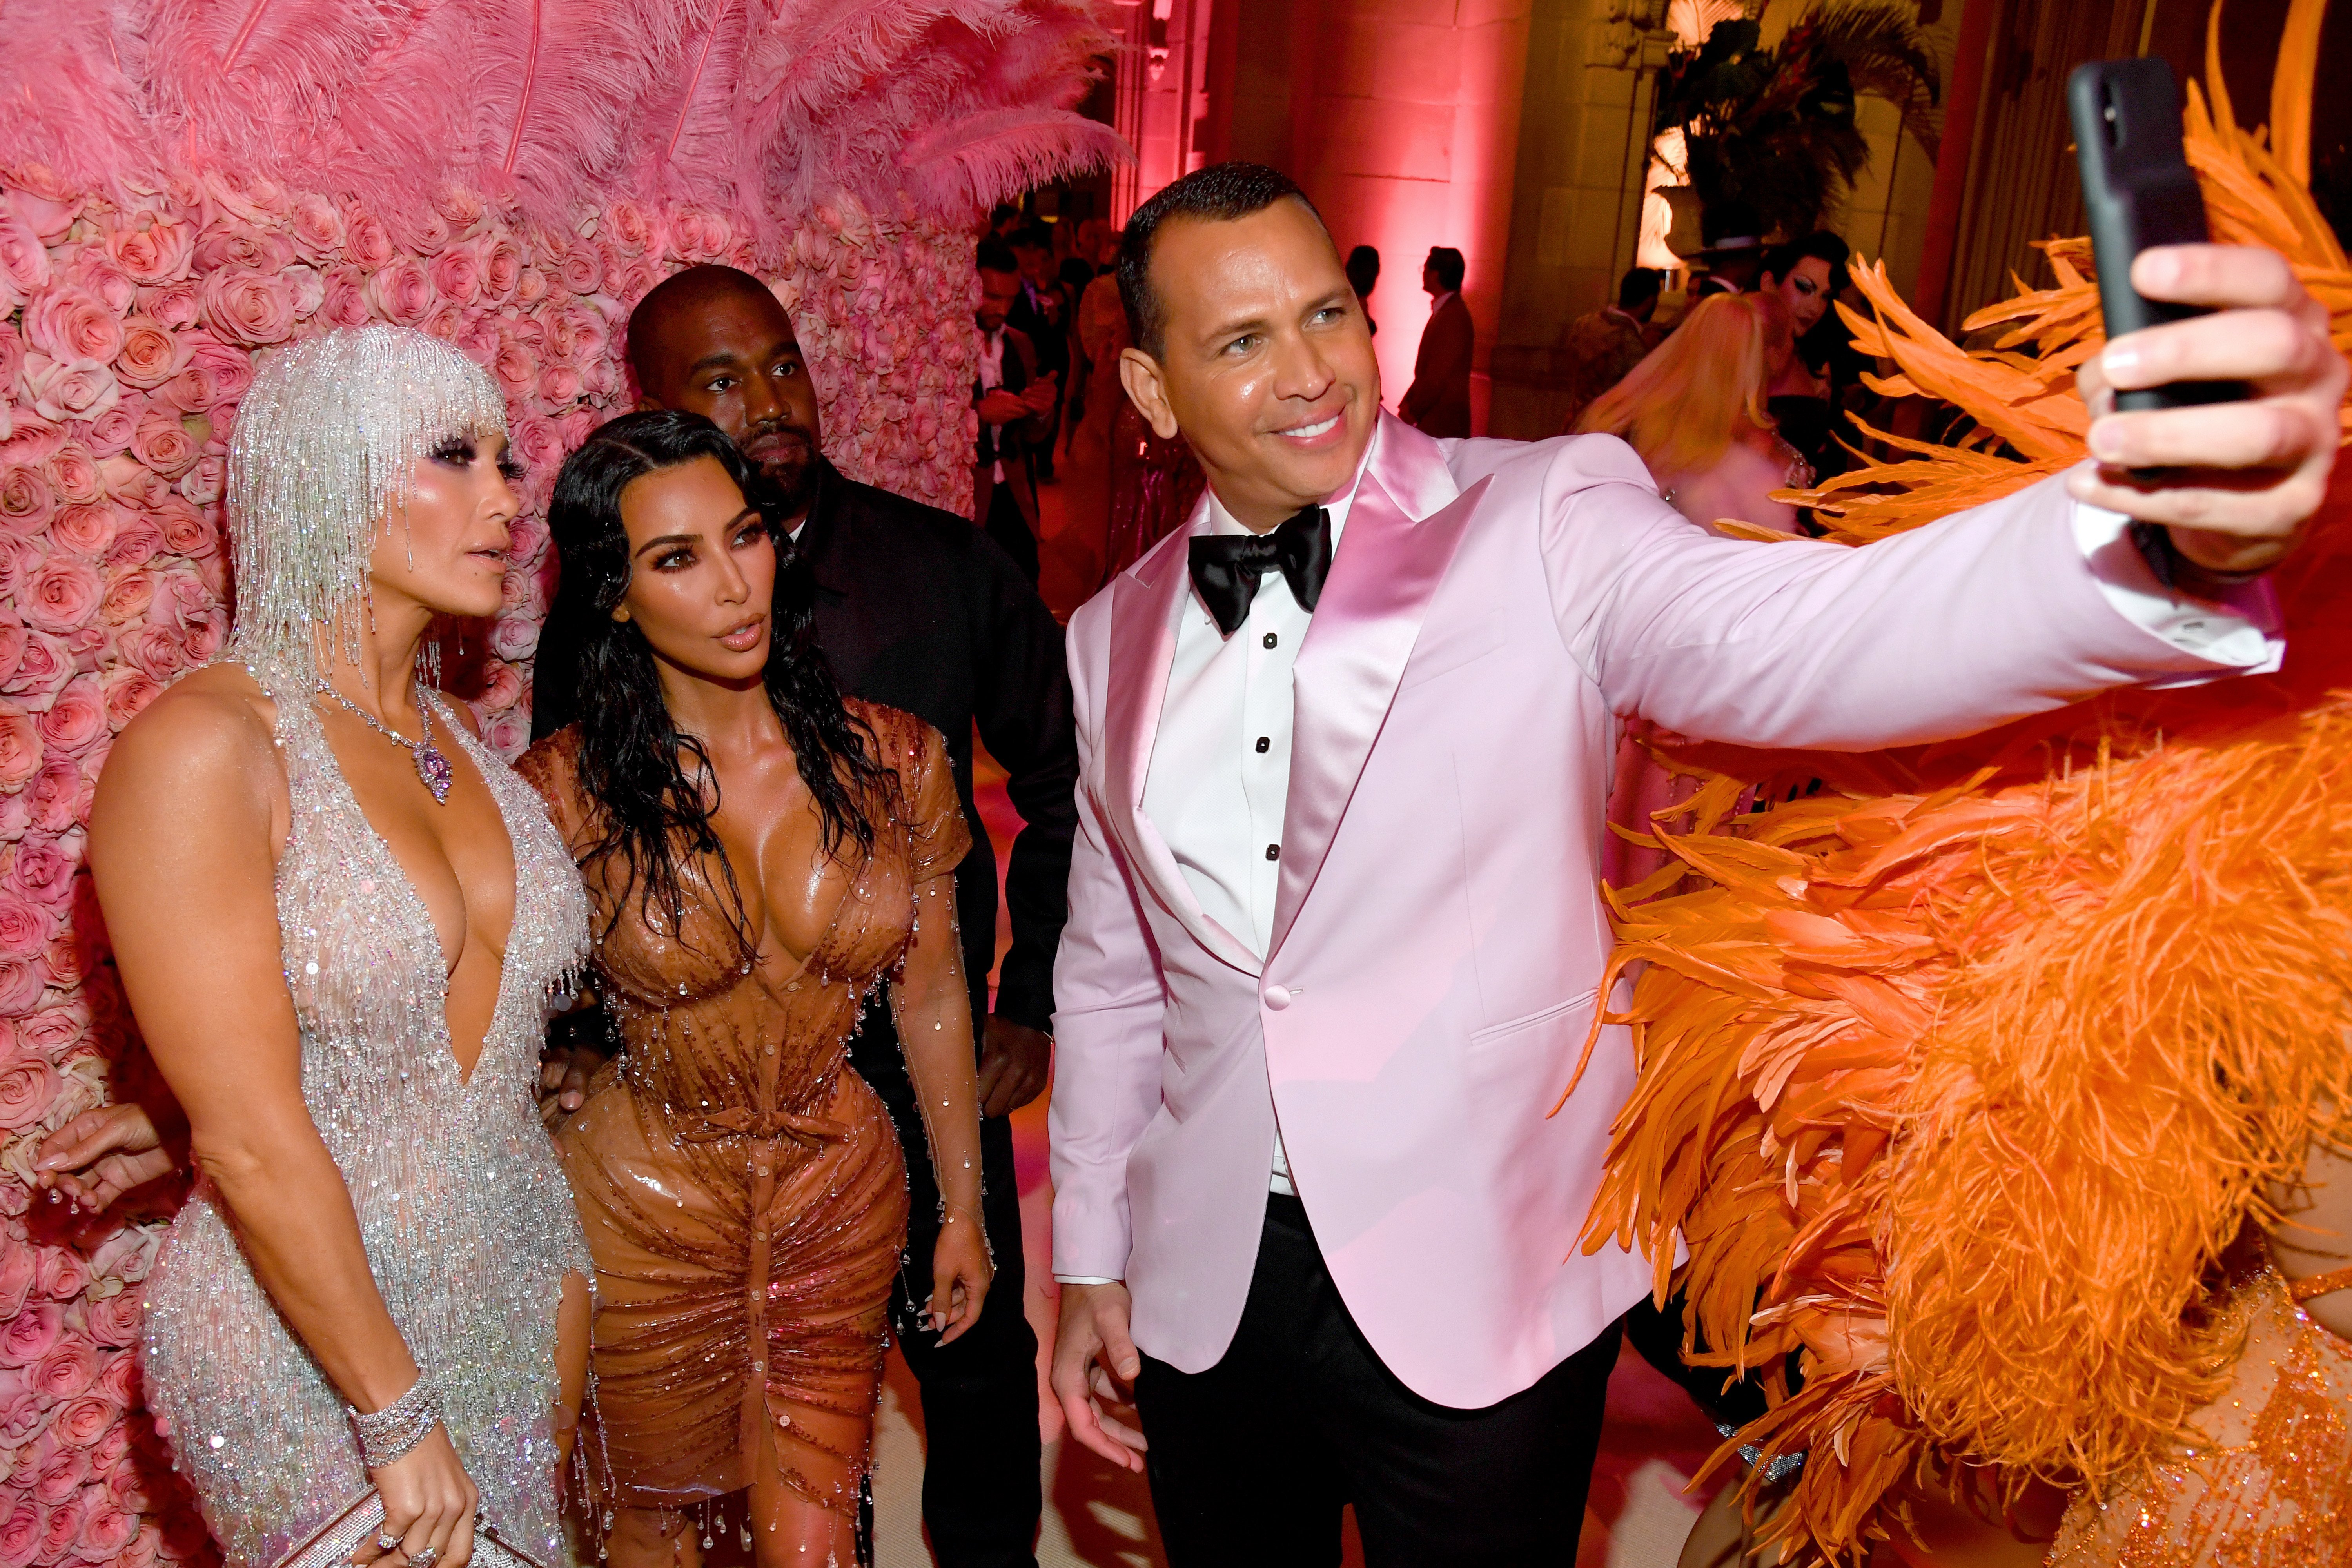 Jennifer Lopez and Alex Rodriguez posing with Kim Kardashian and Kanye West at the 2019 Met Gala | Photo: Getty Images